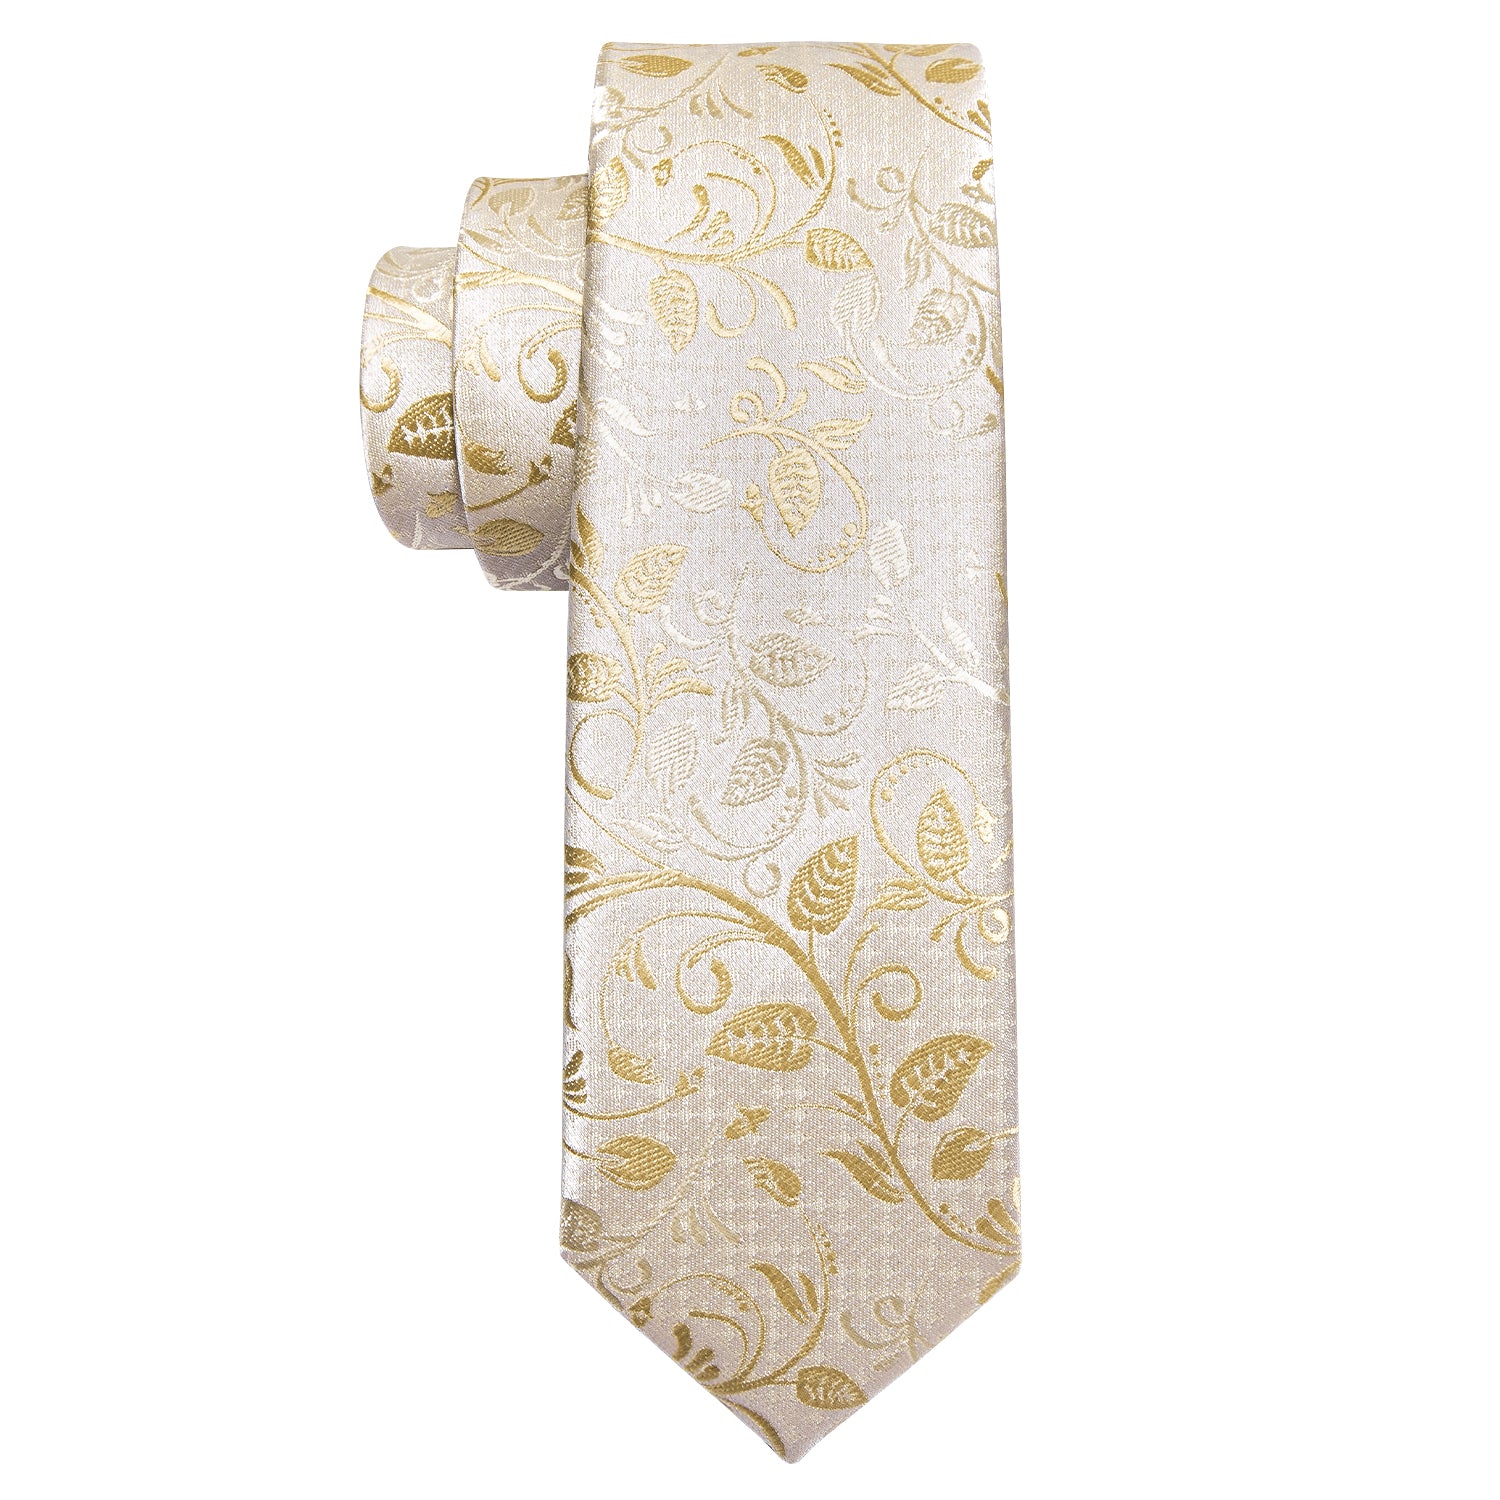 Barry.wang Floral Tie Children Champagne Gold Tie Pocket Square Set